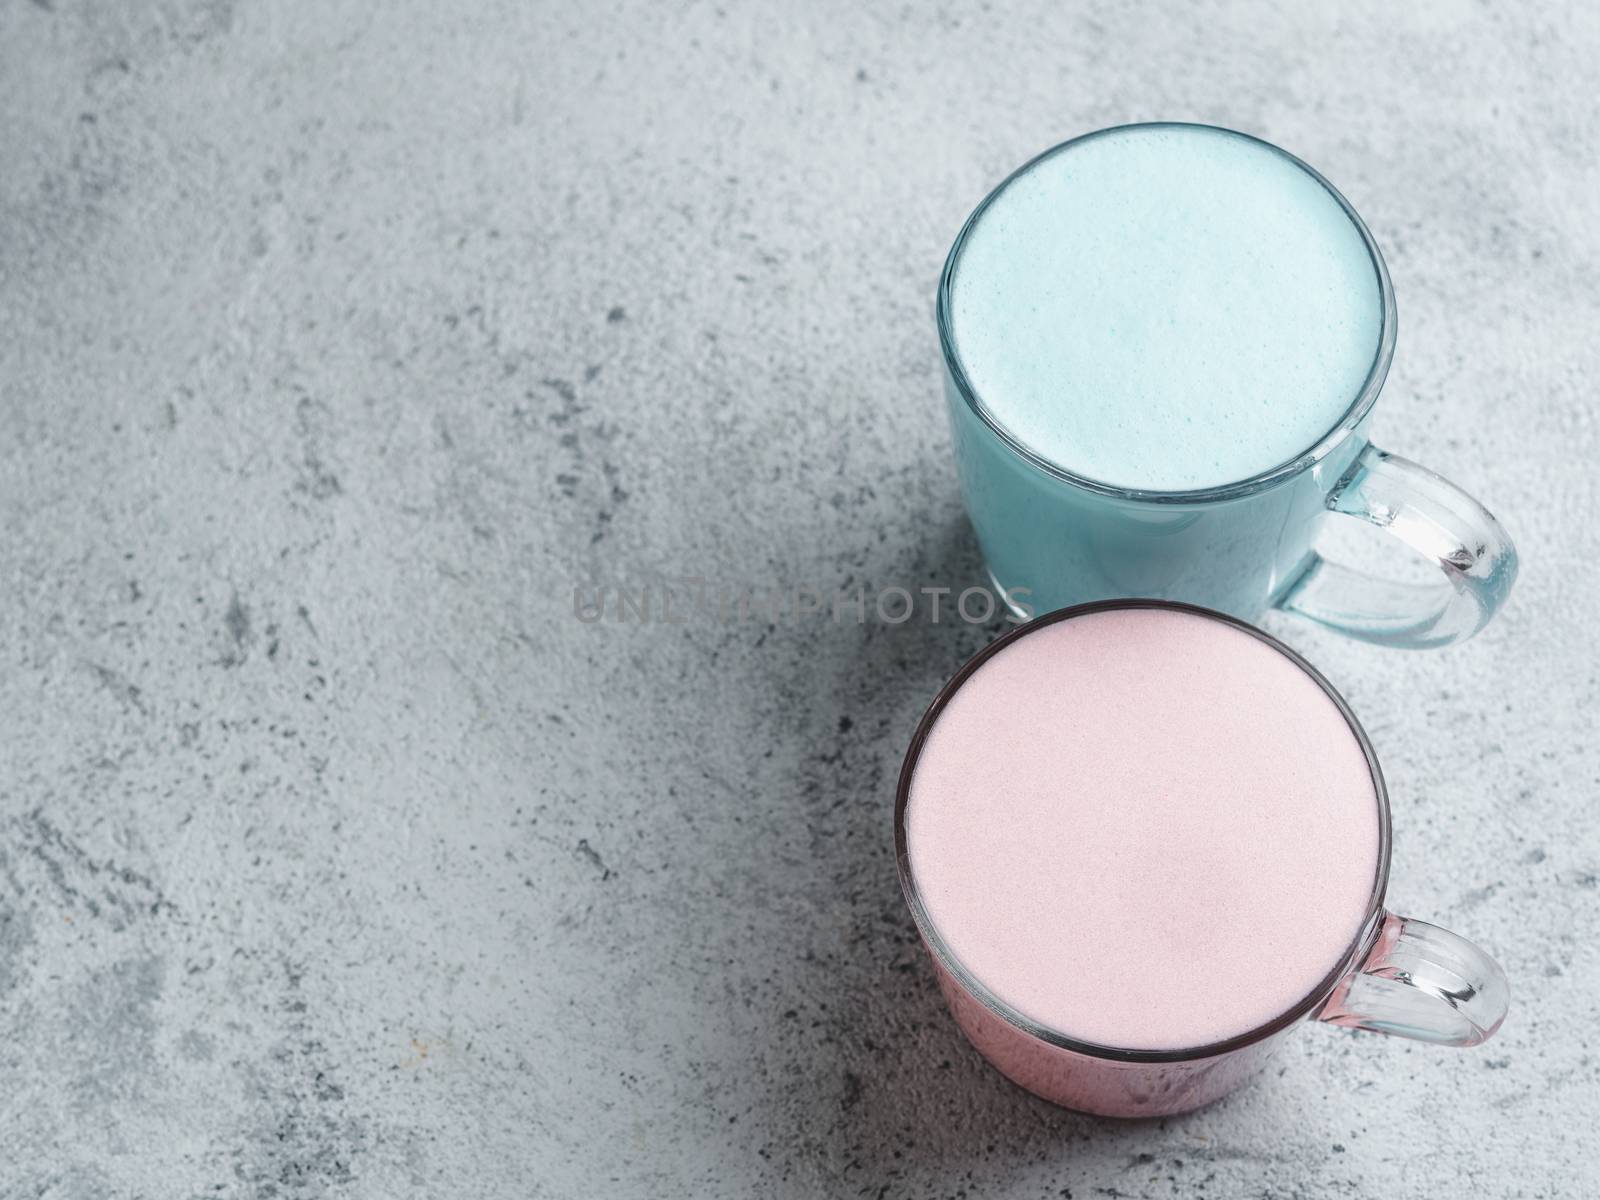 Trendy drink: Blue and pink latte. Top view of hot butterfly pea latte or blue spirulina latte and pink beetroot or raspberry latte on gray cement textured background. Copy space. Top view or flat lay